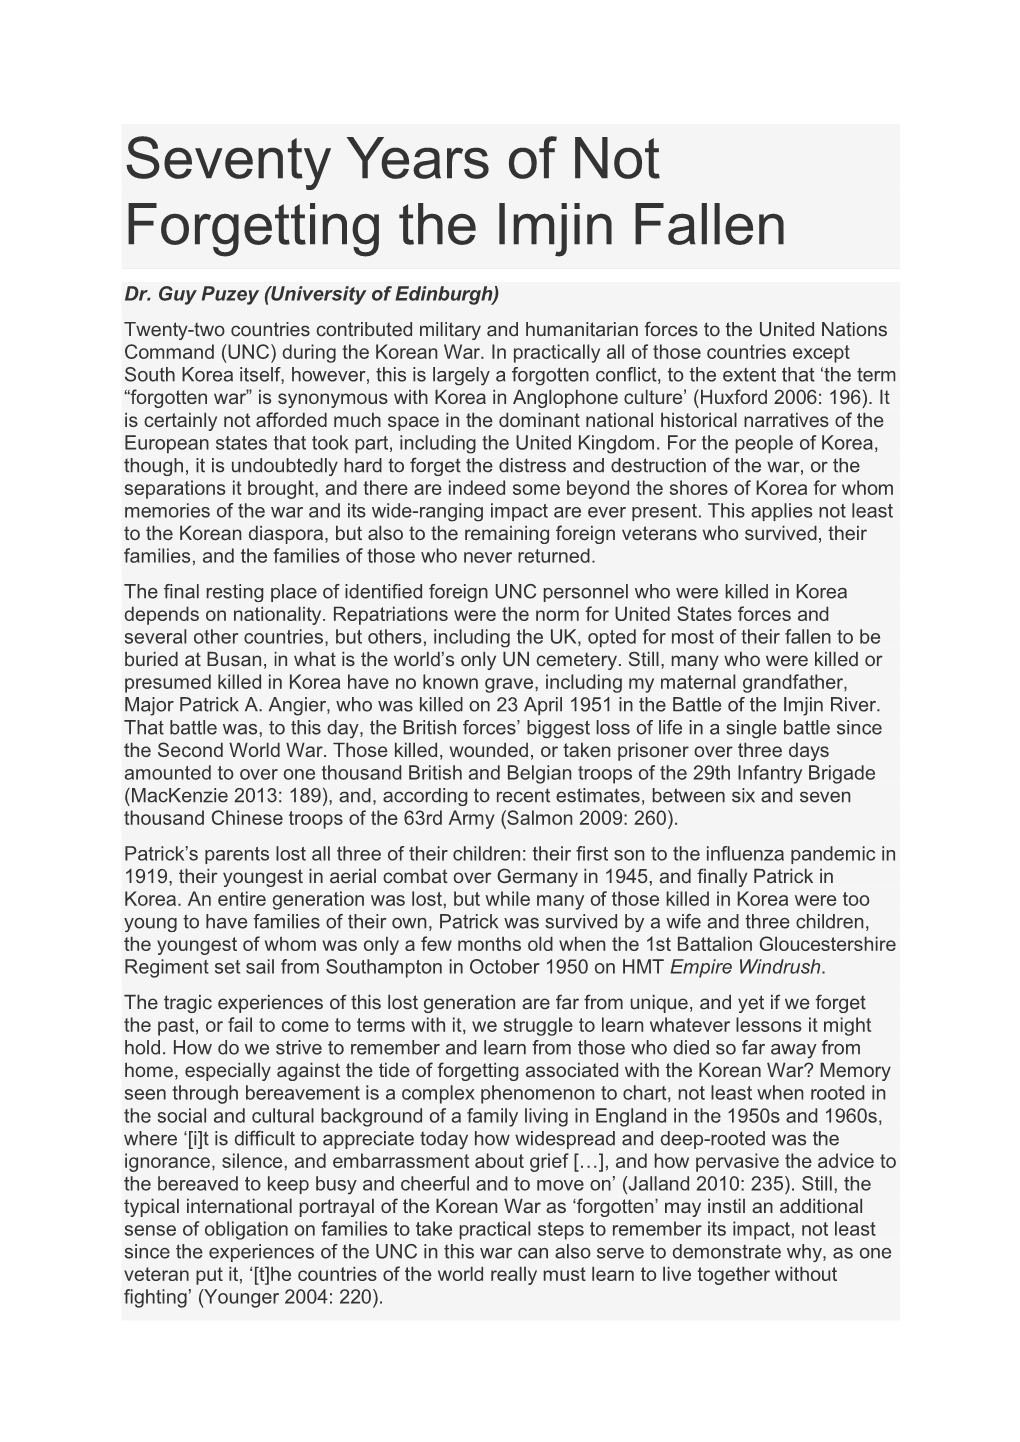 Seventy Years of Not Forgetting the Imjin Fallen